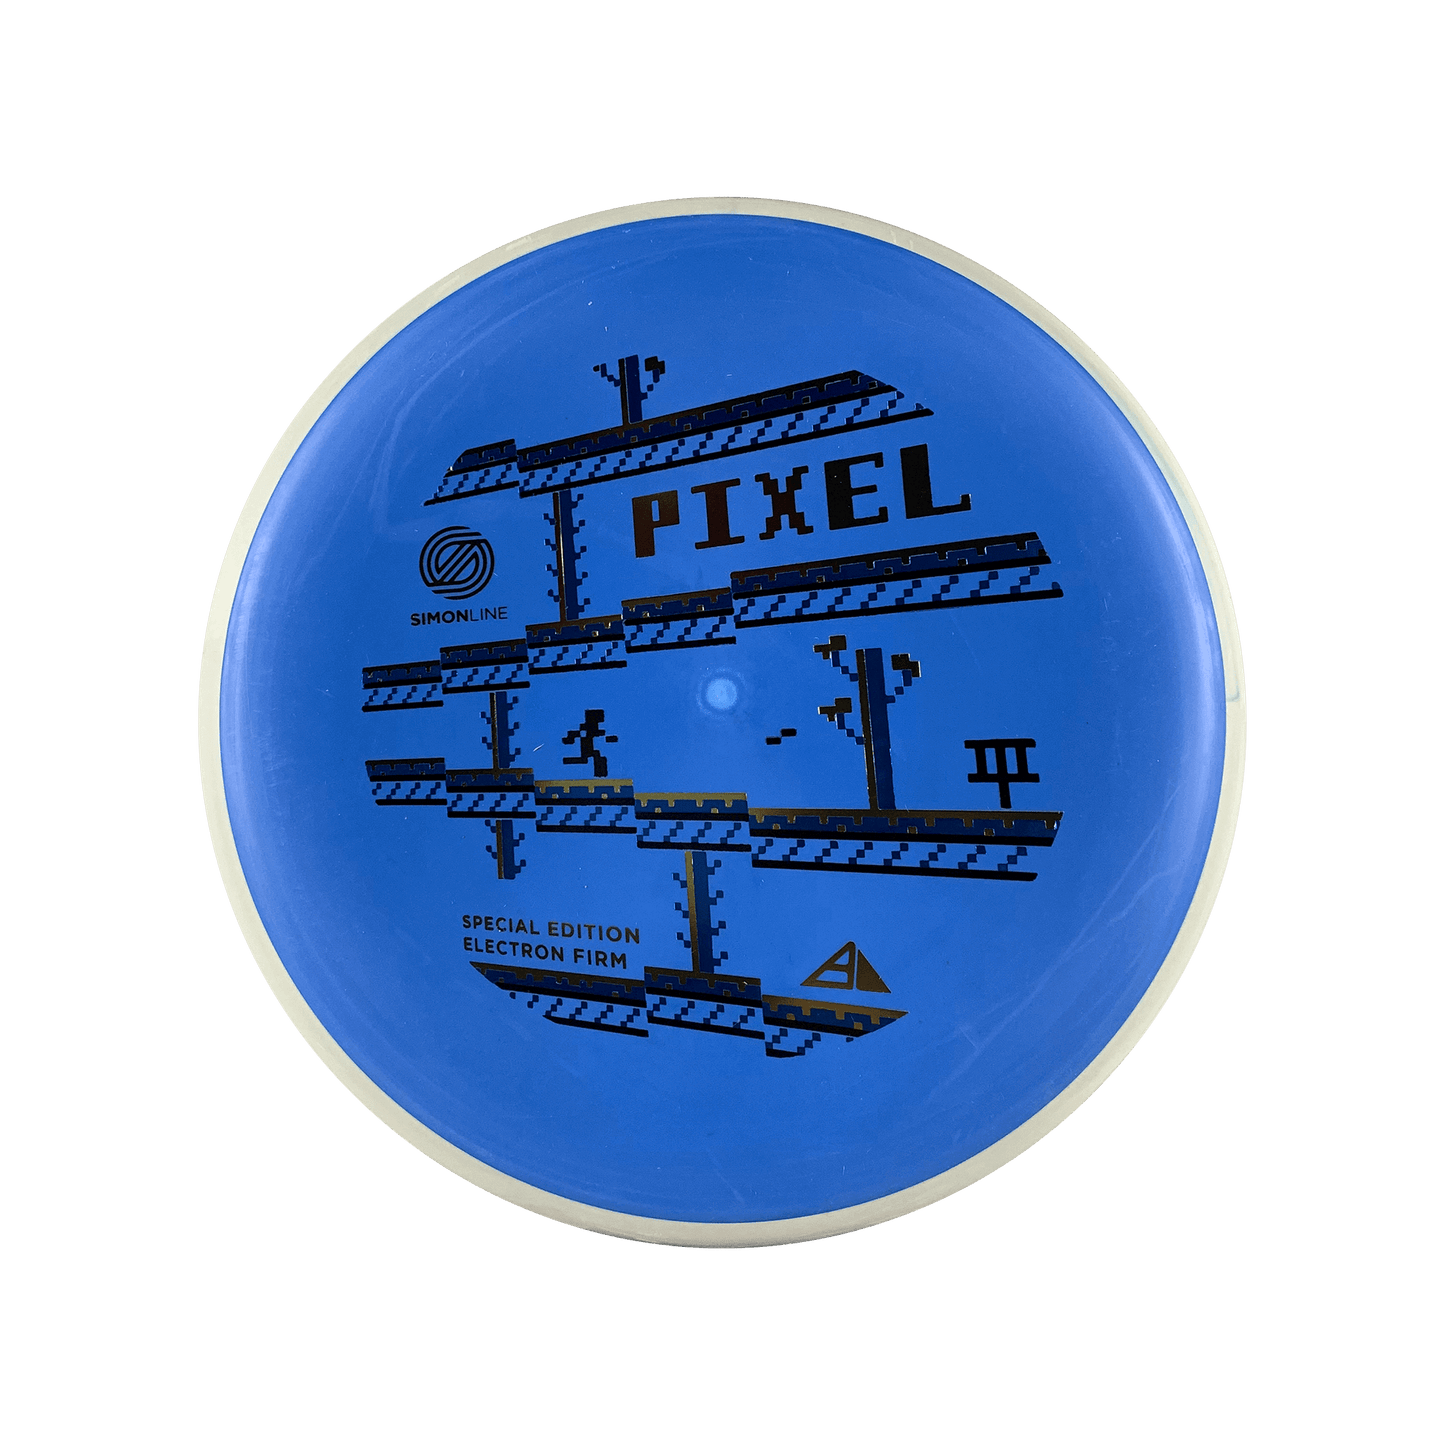 Electron Firm Pixel - Special Edition Disc Axiom multi / blue 174 